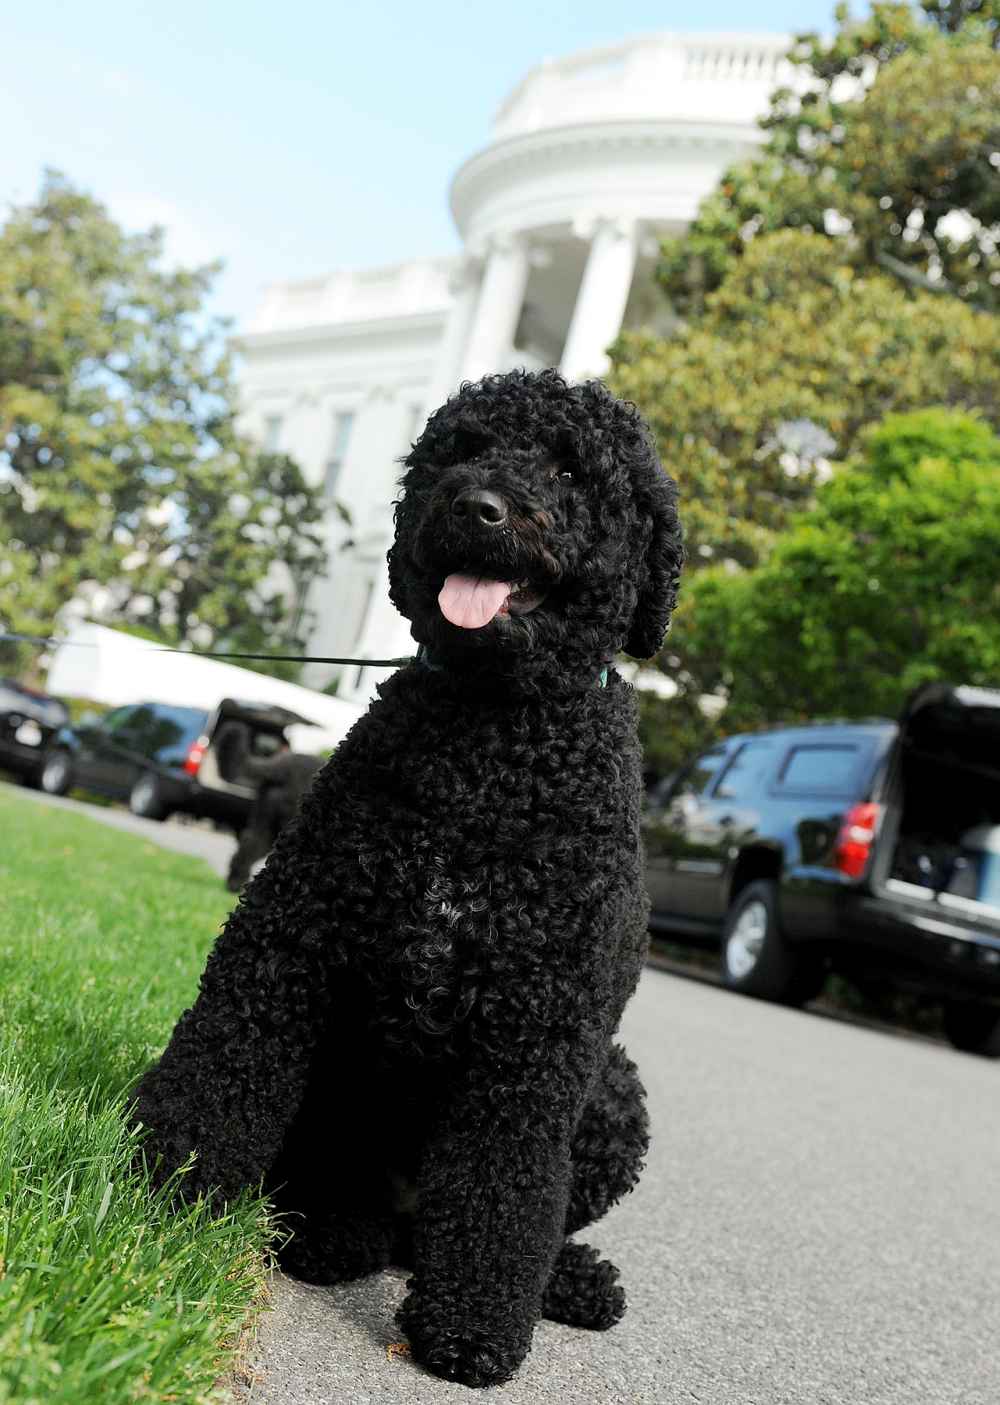 Obama family dog Sunny takes a walk on the South Lawn of the White House on May 17, 2014 in Washington, DC.